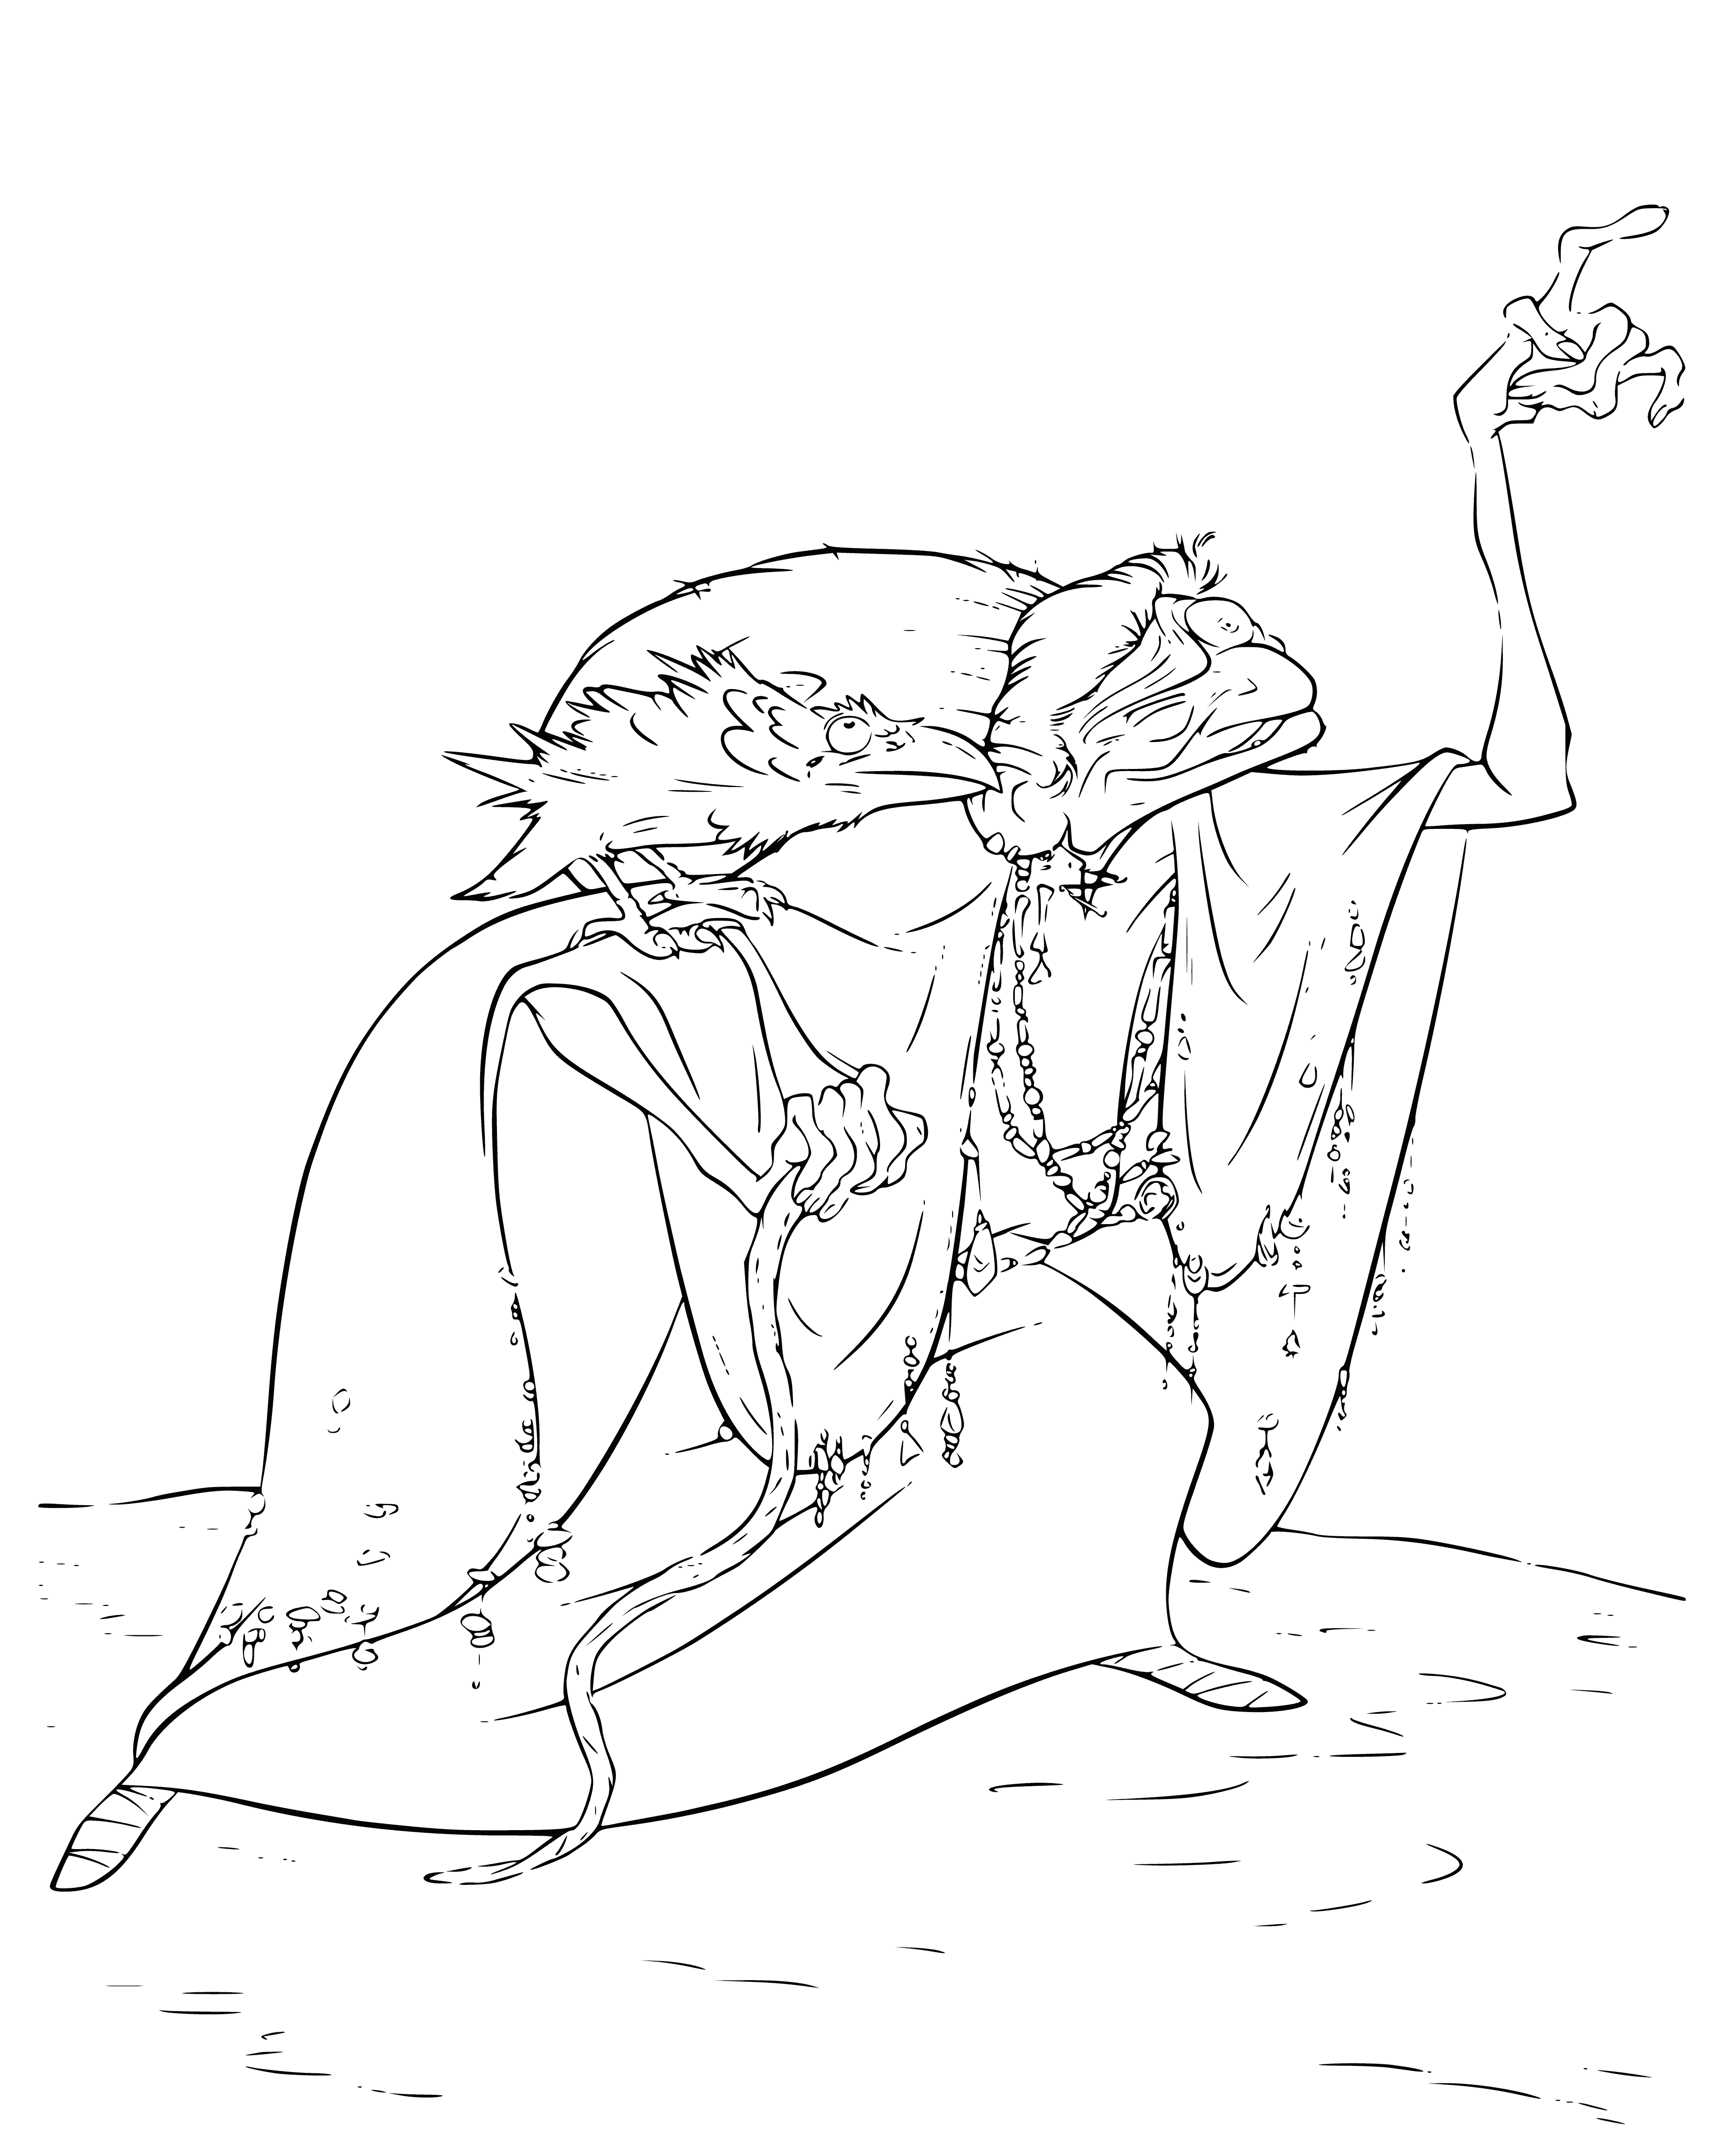 coloring page: Witch and her raven ready for anything in dark forest; she cloaked in green, bird perched on her shoulder - bright eyes and beak like a grin.